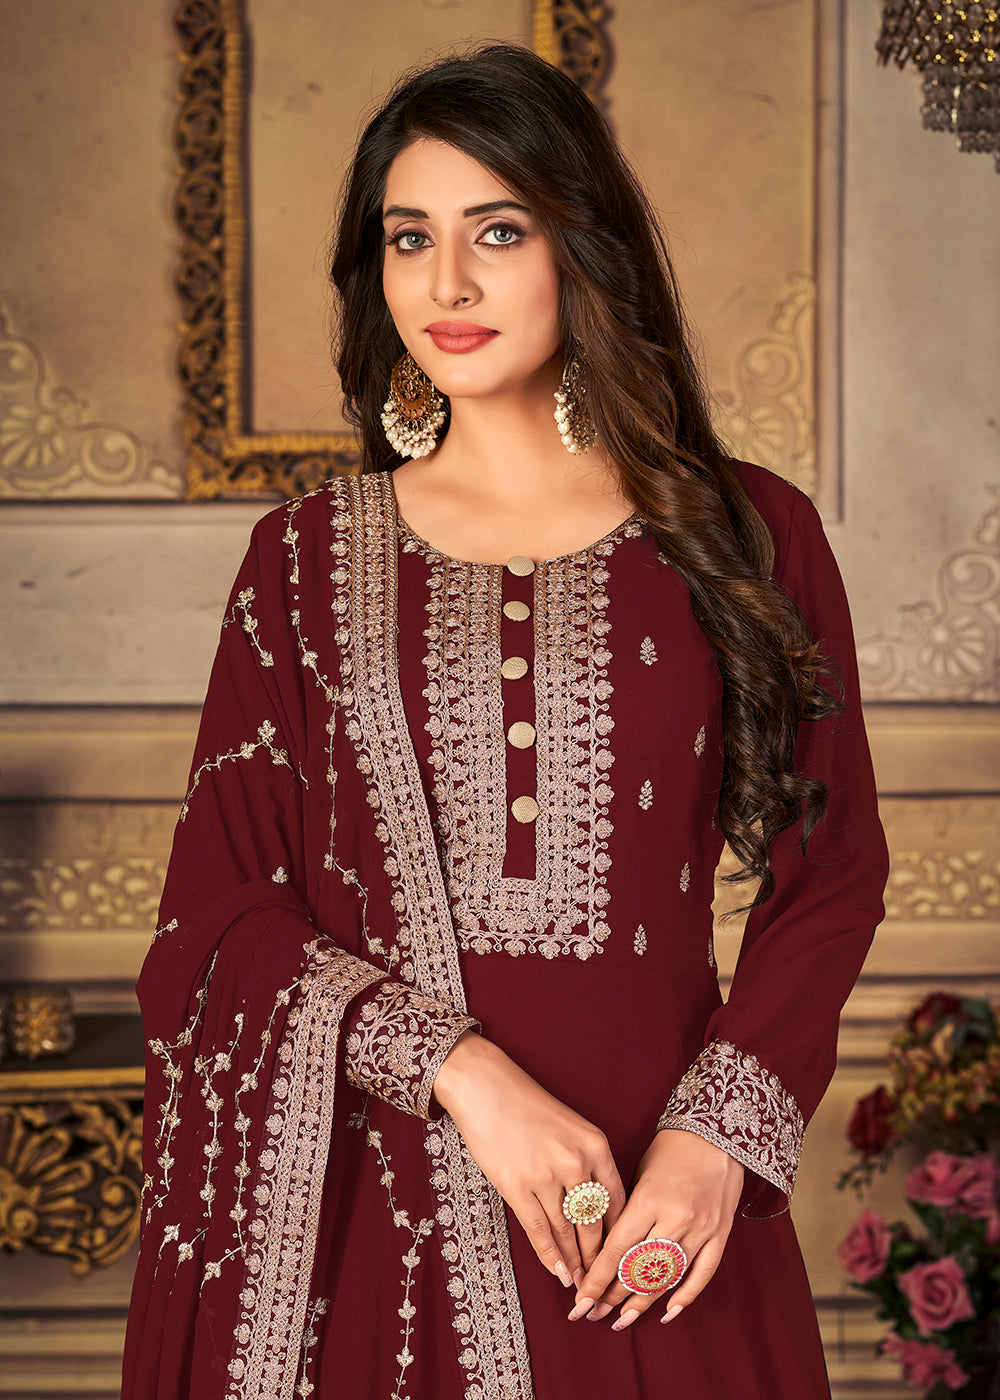 Buy Now Georgette Pretty Maroon Embellished Wedding Fest Anarkali Suit Online in Canada at Empress Clothing.